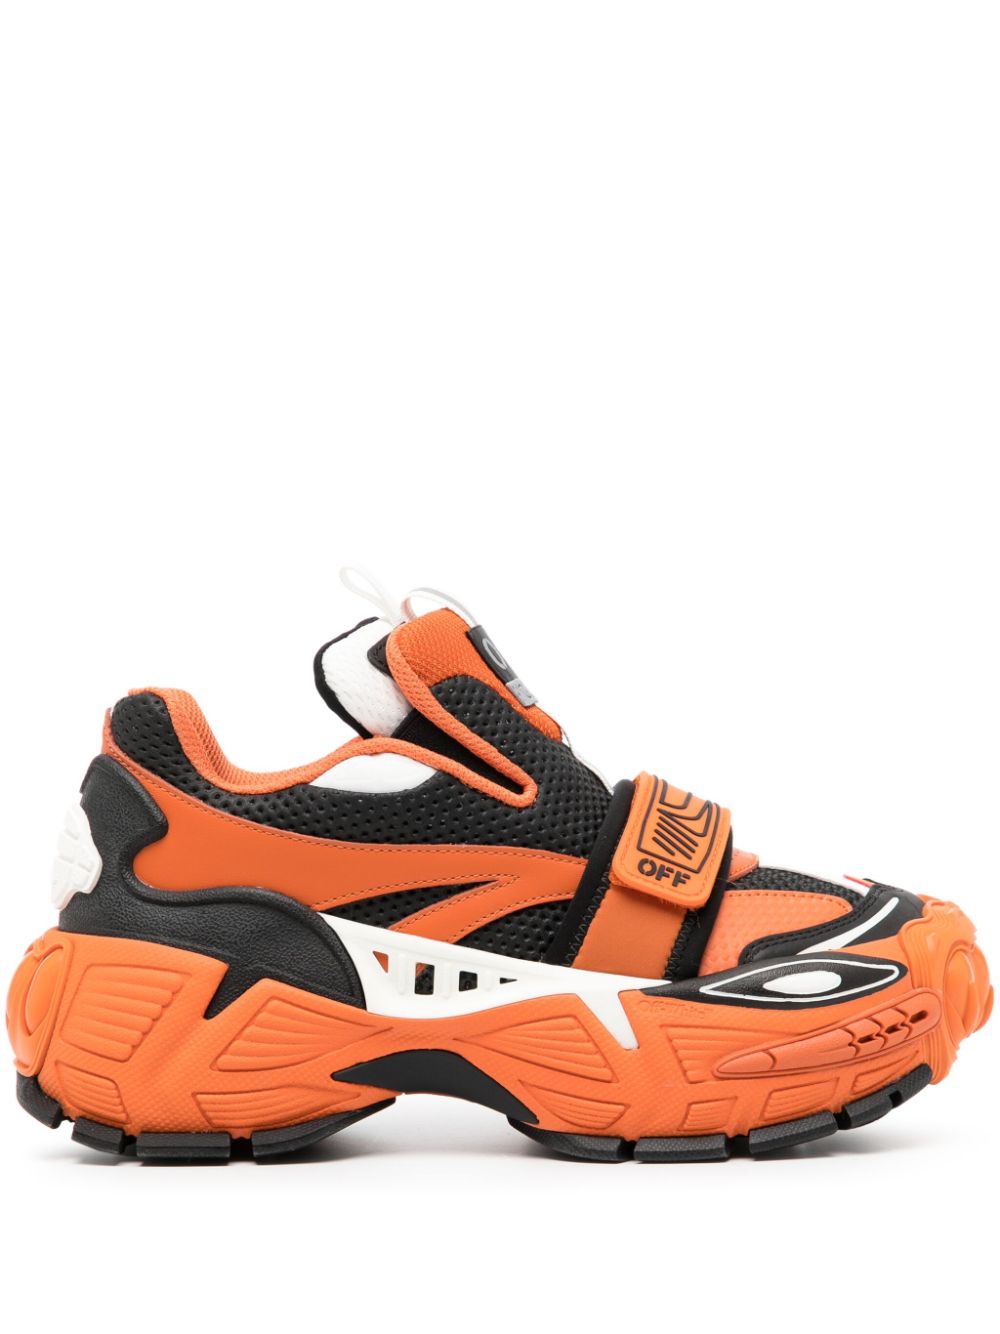 Off-white Glove Panelled Sneakers In Orange